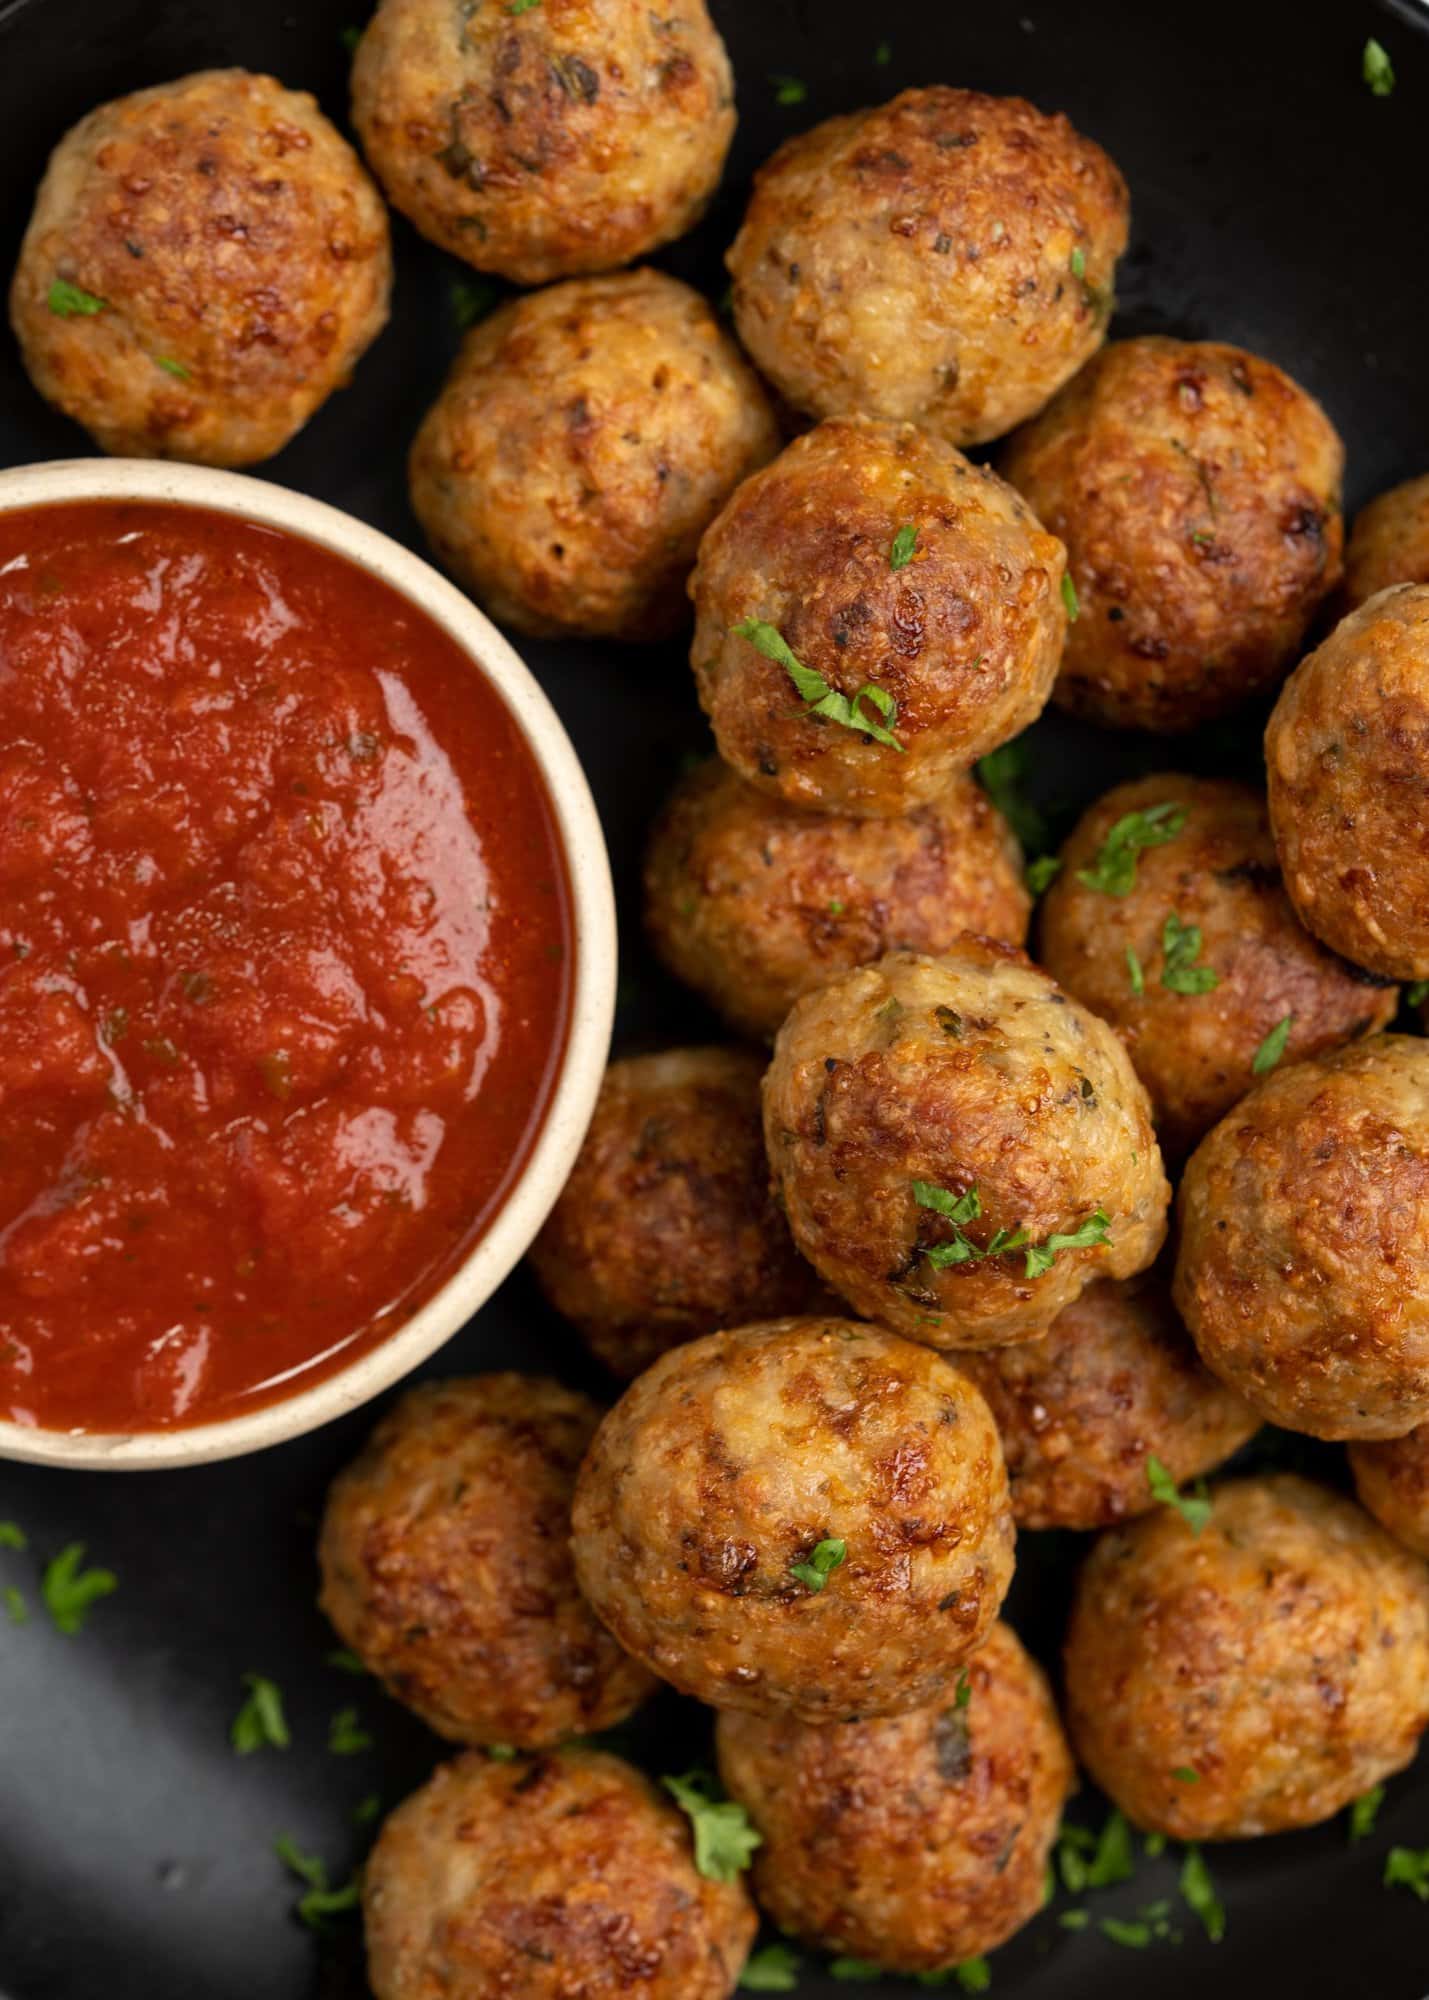 Golden brown chicken meatballs, with a crisp exterior and juicy chicken inside, are baked and served on a black plate, along with marinara sauce.